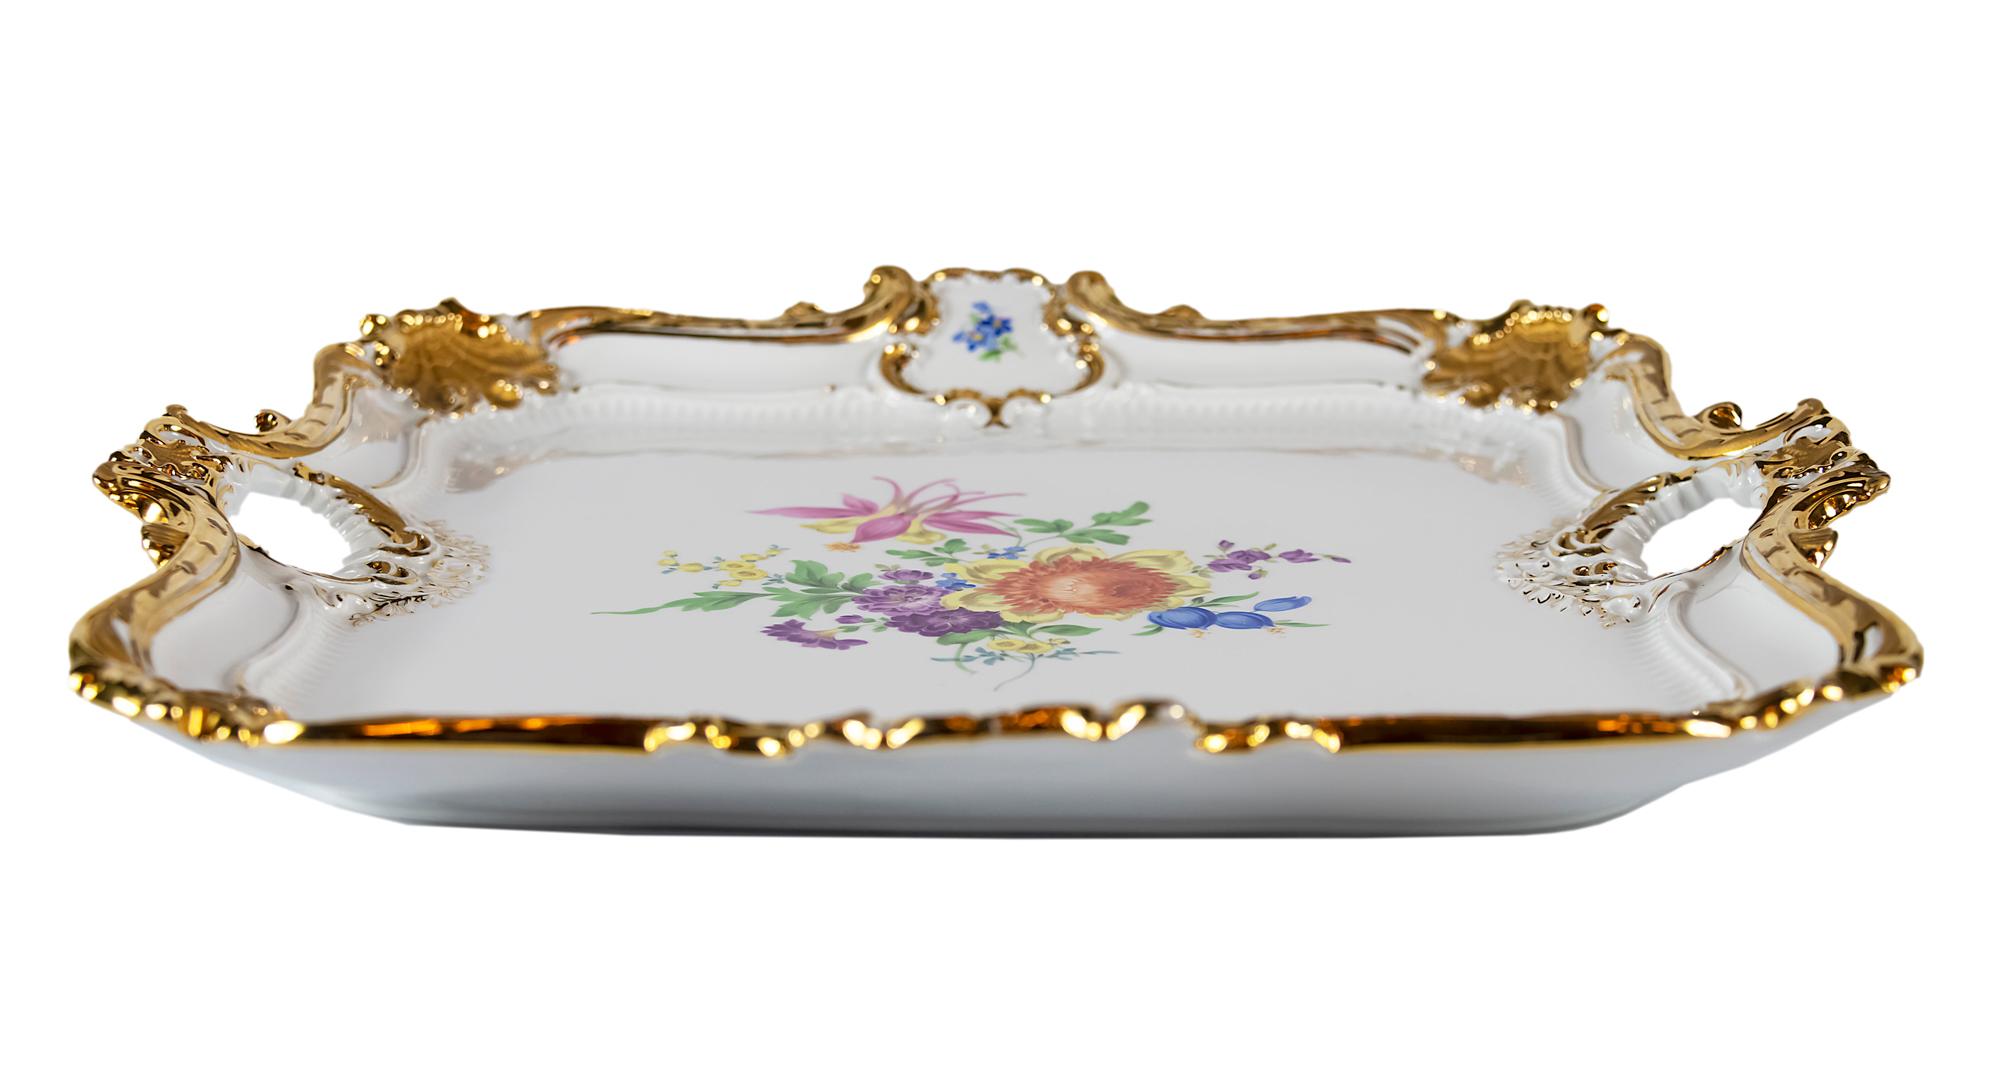 Large Meissen Porcelain serving plate/tray with hand painted floral motives and rich gold decor.